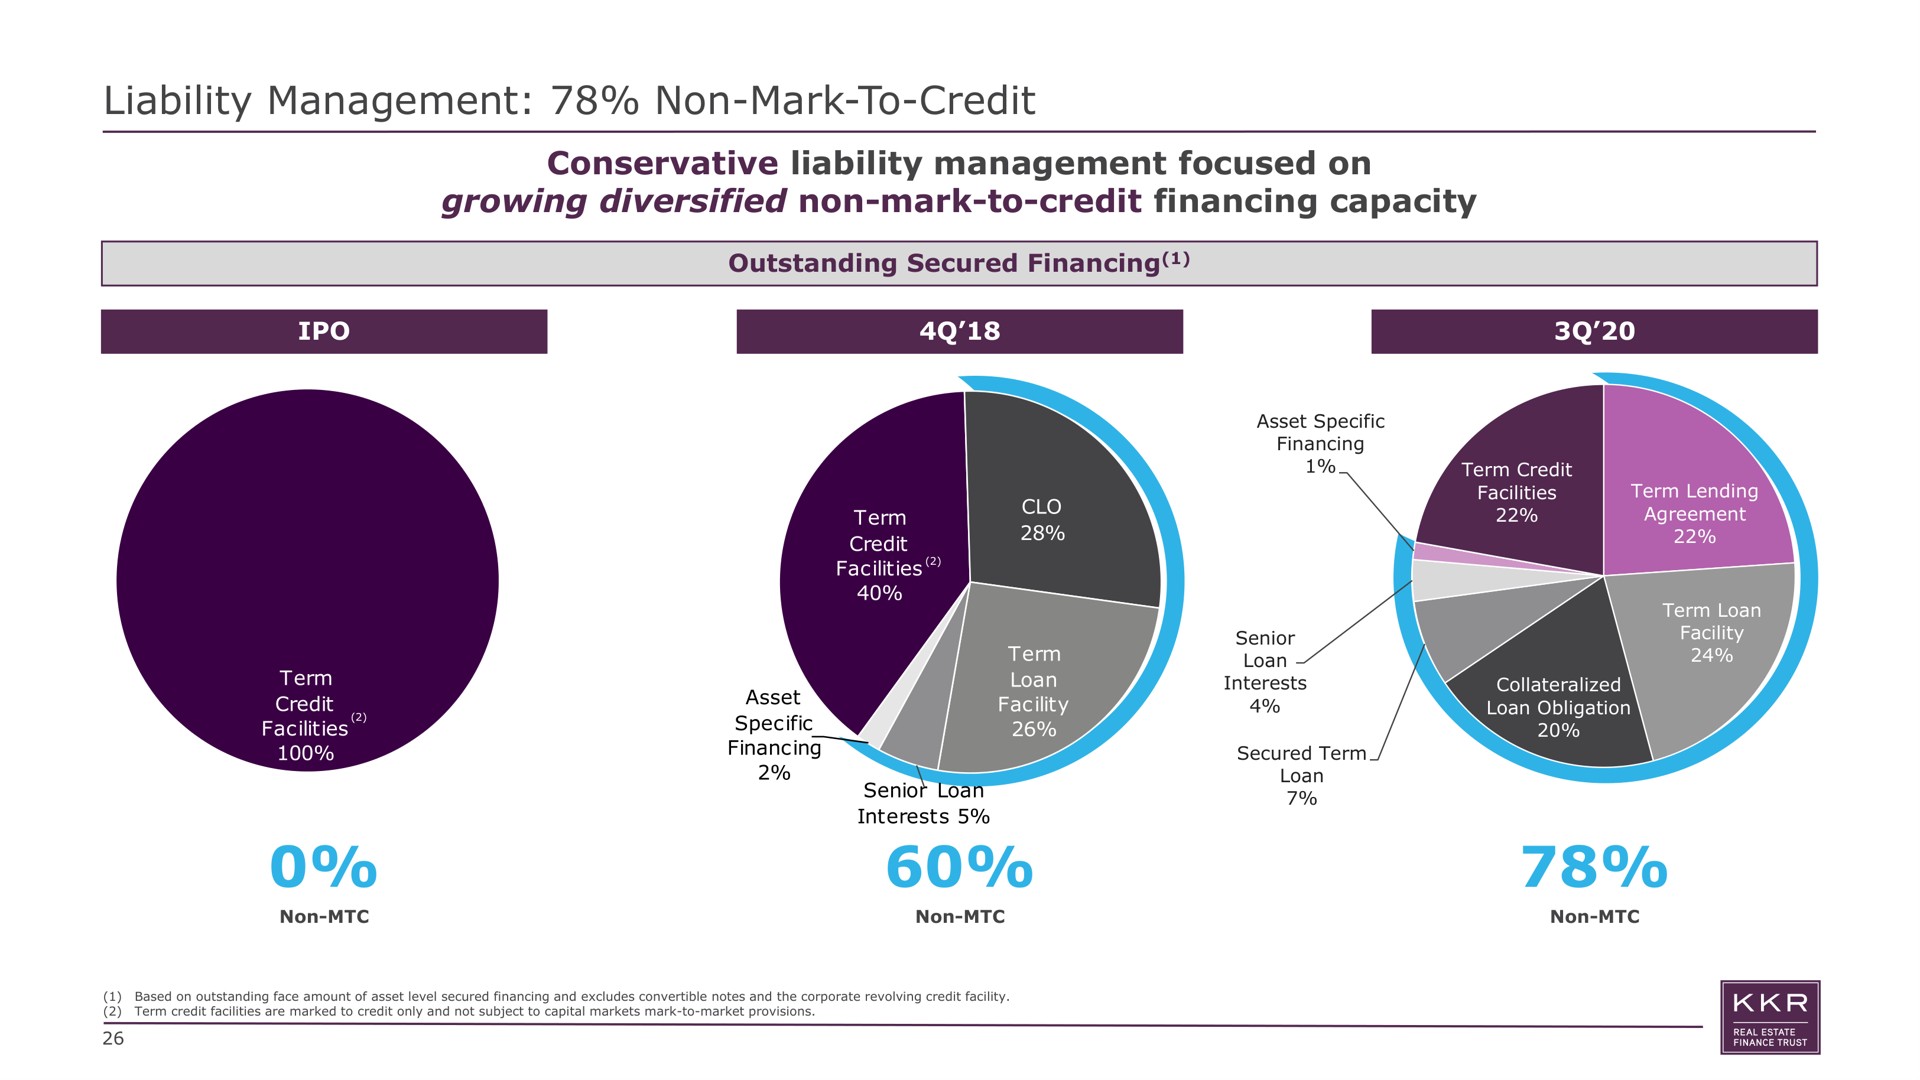 liability management non mark to credit conservative liability management focused on growing diversified non mark to credit financing capacity outstanding secured atoll | KKR Real Estate Finance Trust